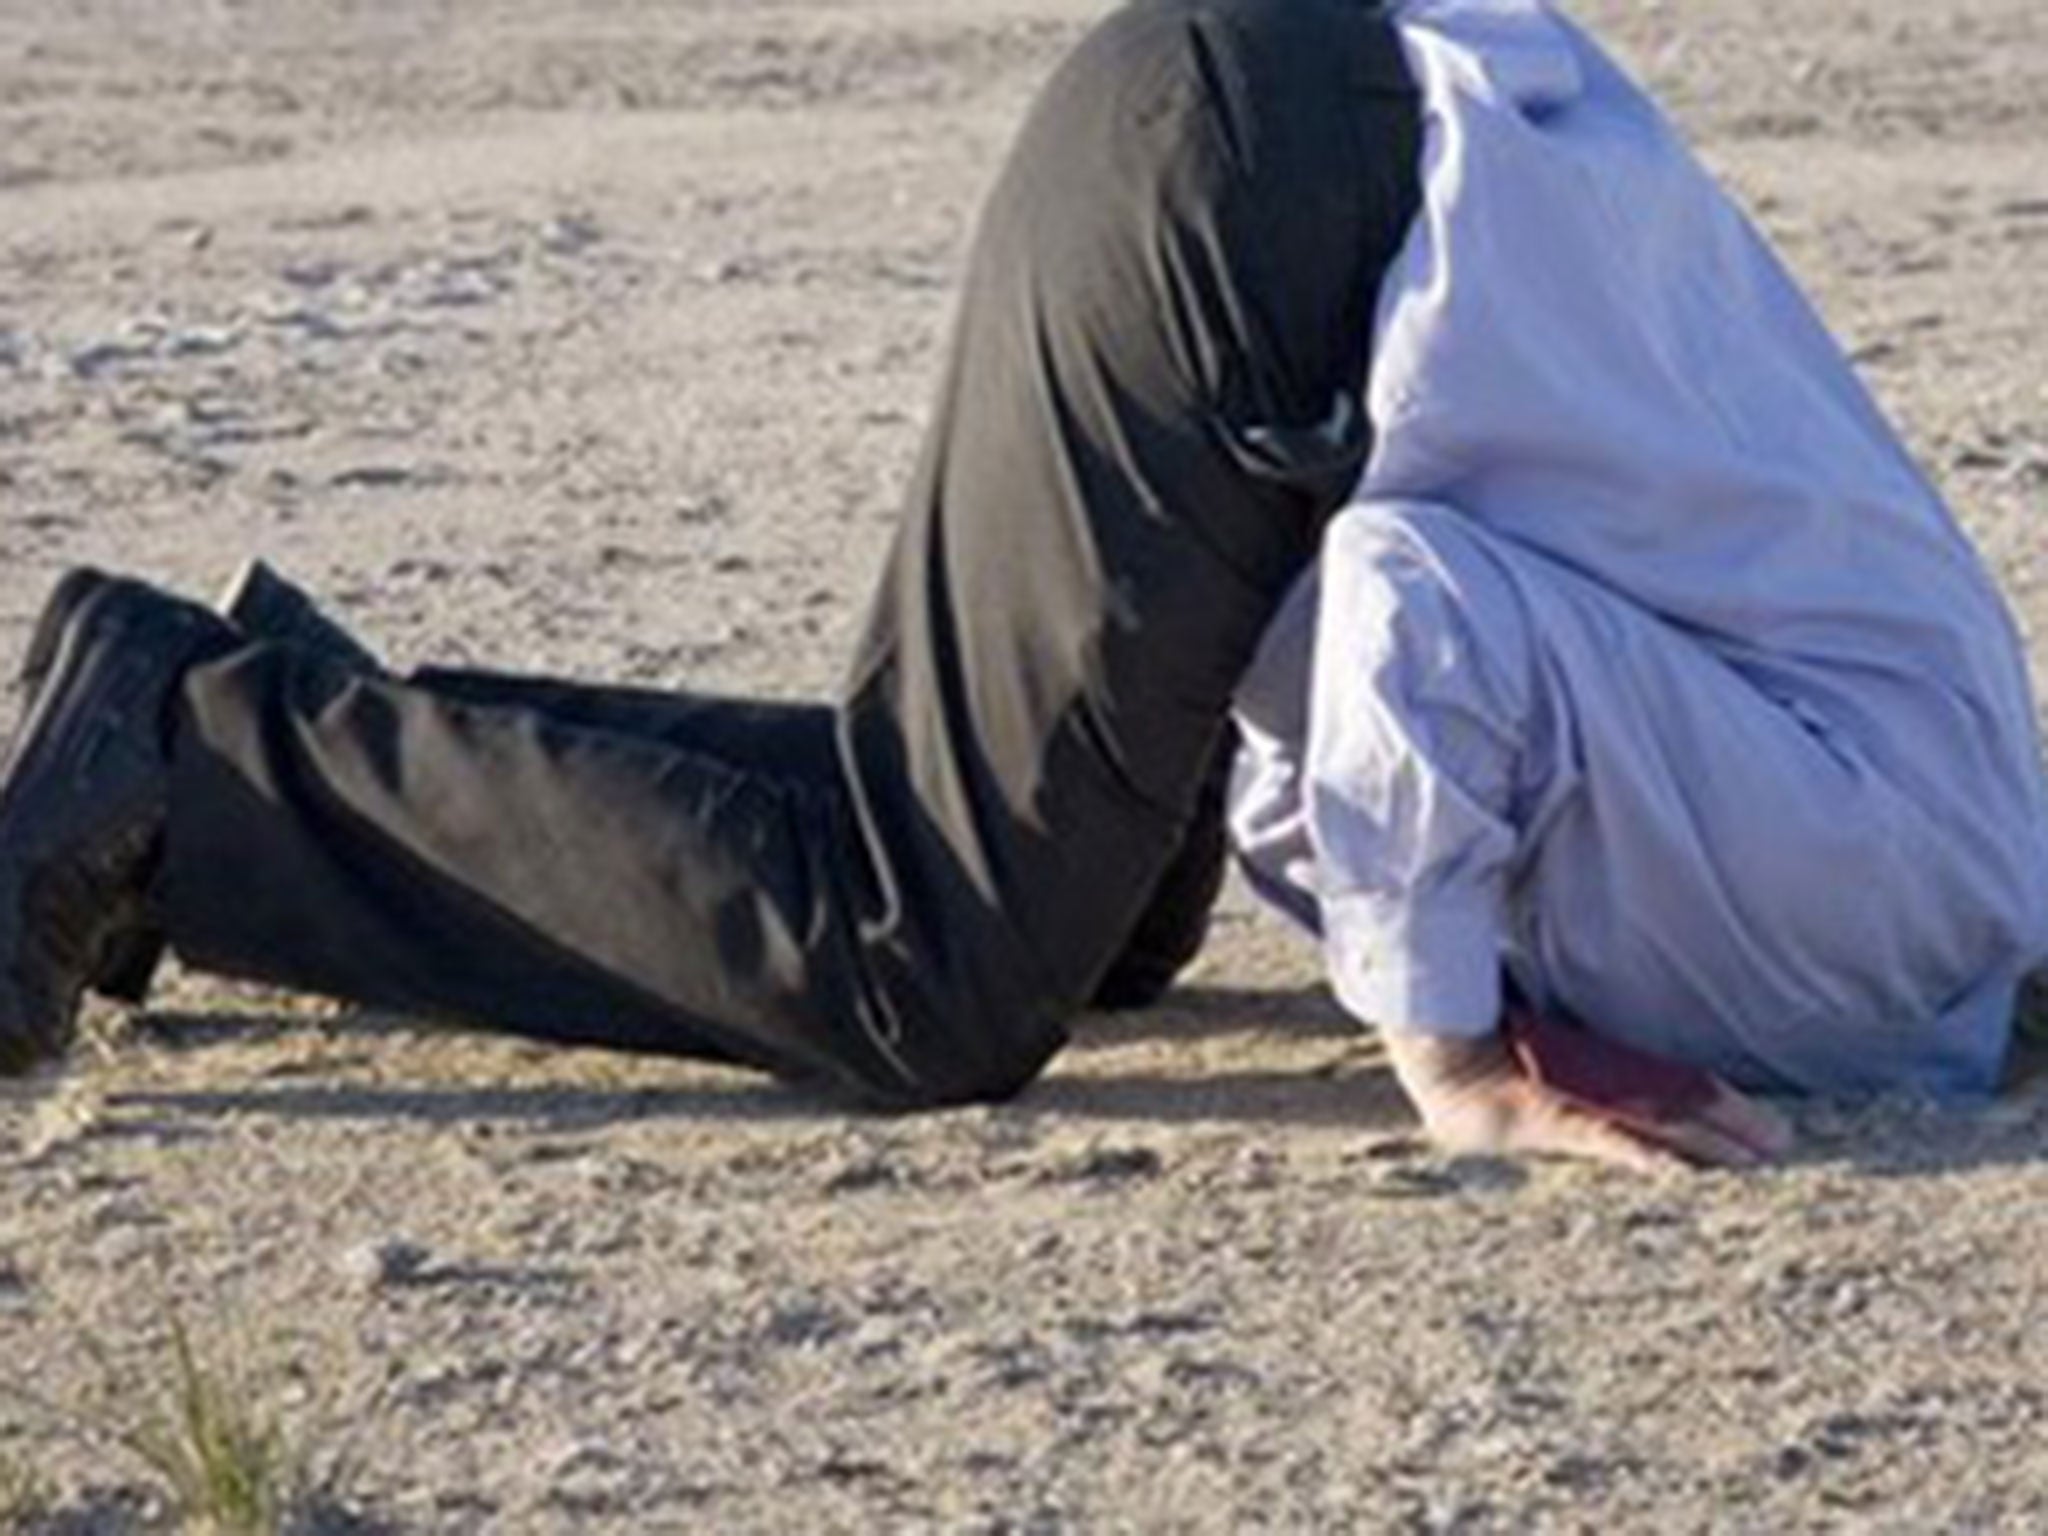 A picture of someone with their head in the sand